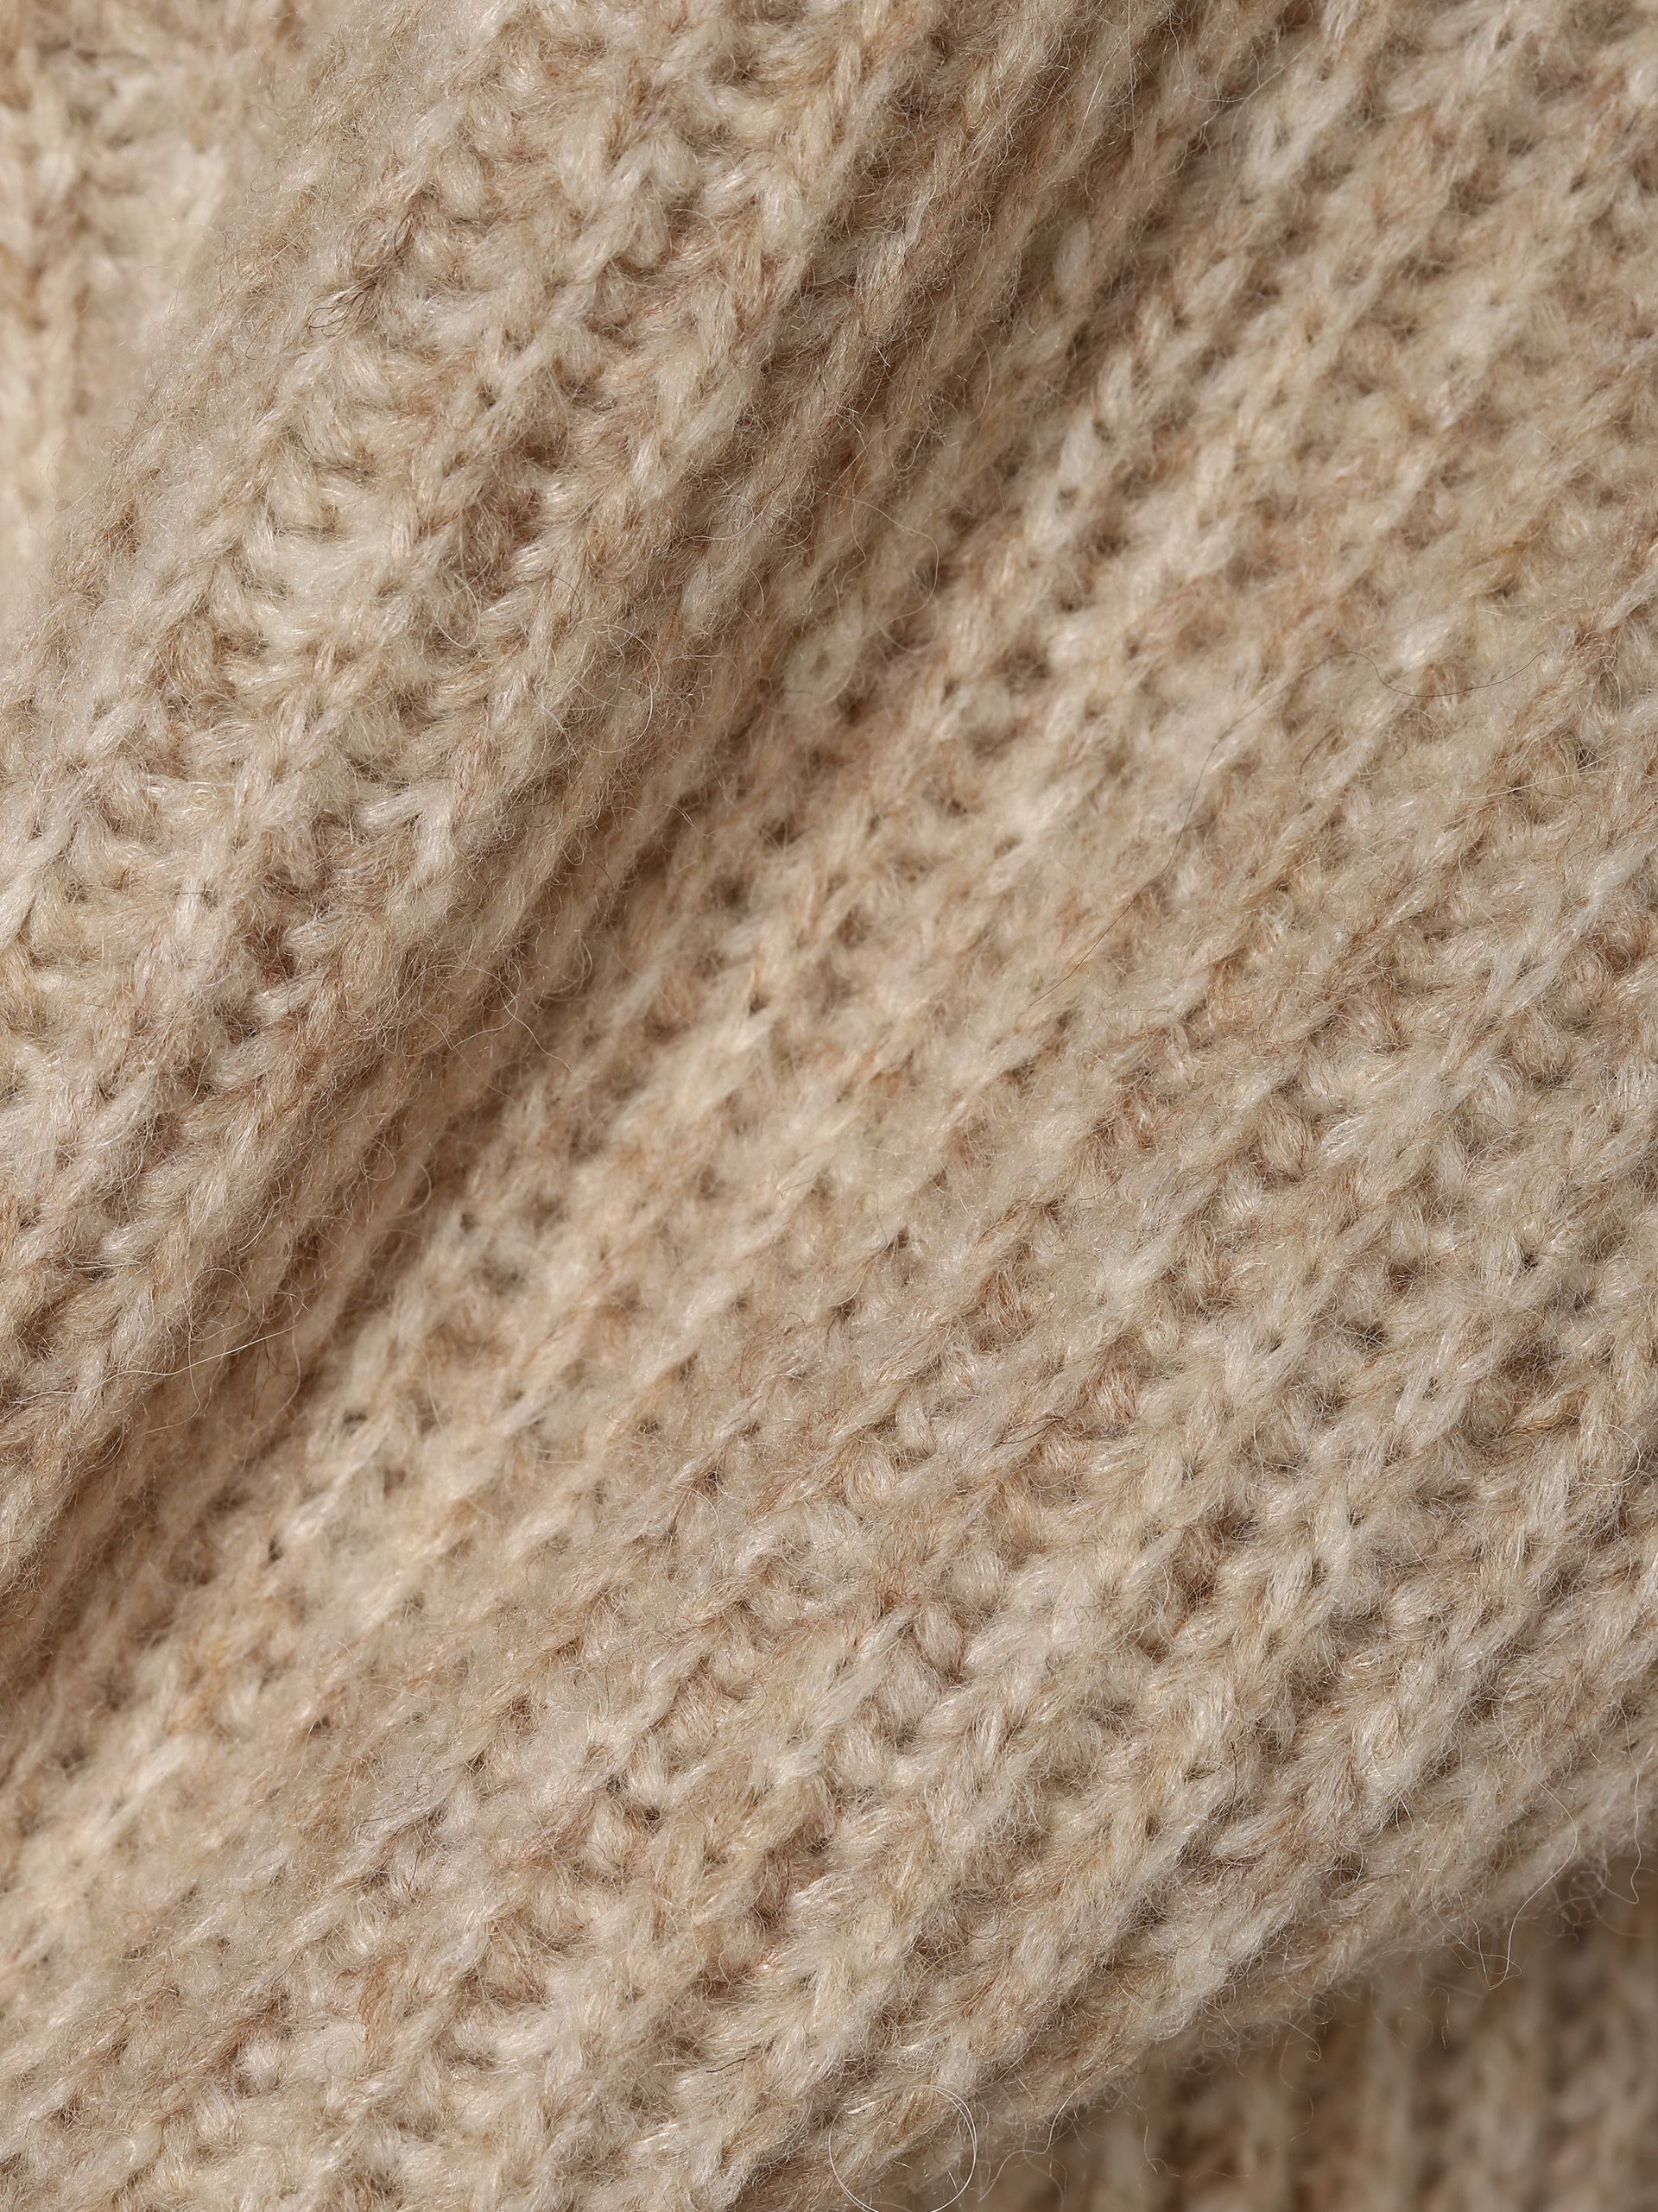 Marie Lund Pullover in Sand 